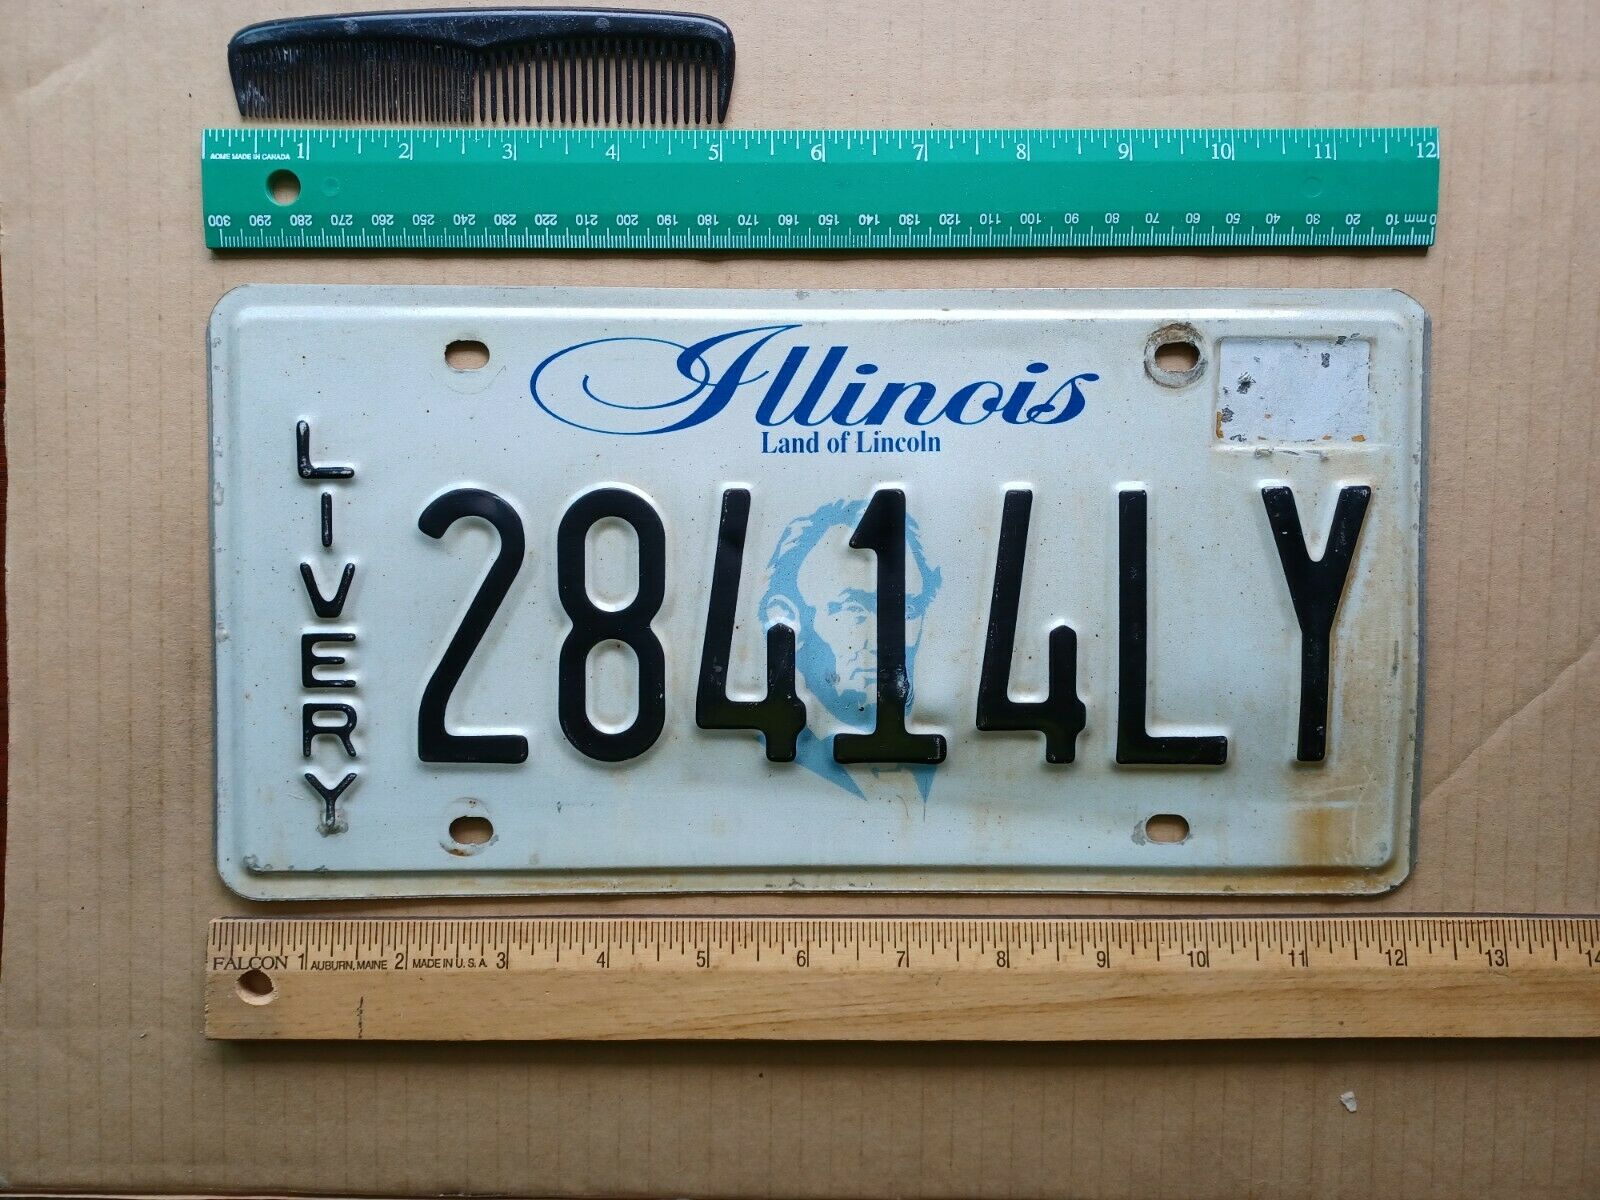 License Plate, Illinois, Bust of Abraham Lincoln, Livery (Limousine) 28414 LY